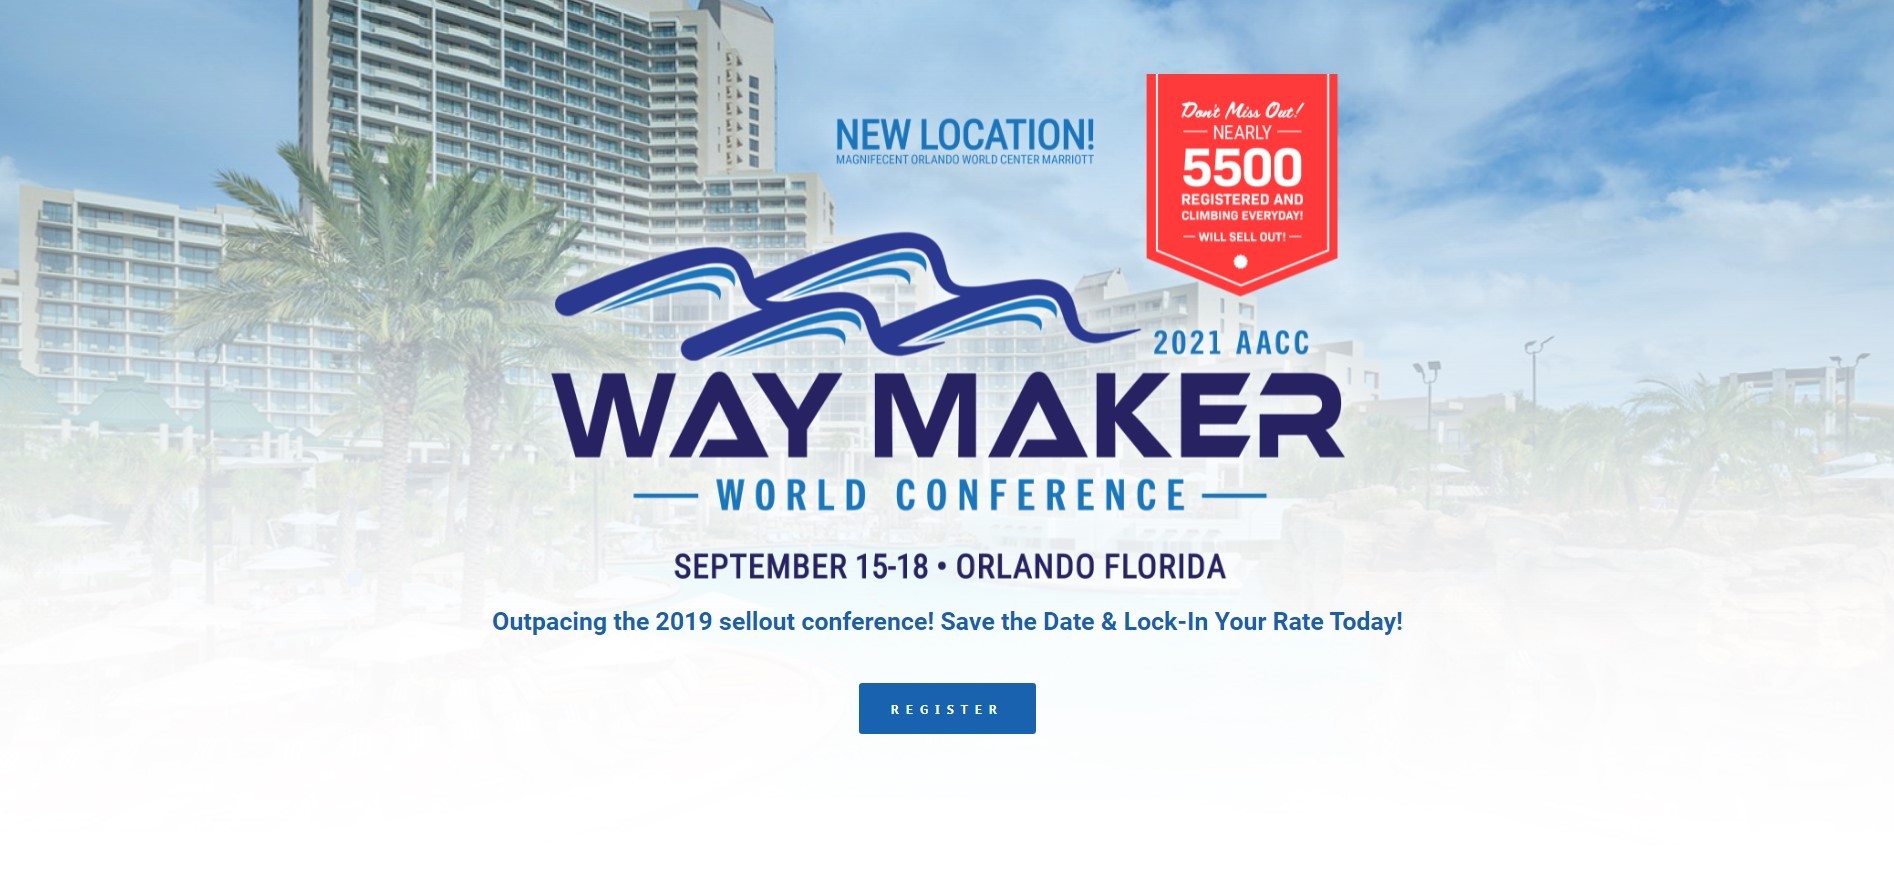 AACC to host 'Way Maker World Conference' for mental health and ministry professionals, features Dr. Ben Carson, Levi Lusko, Lysa TerKeurst